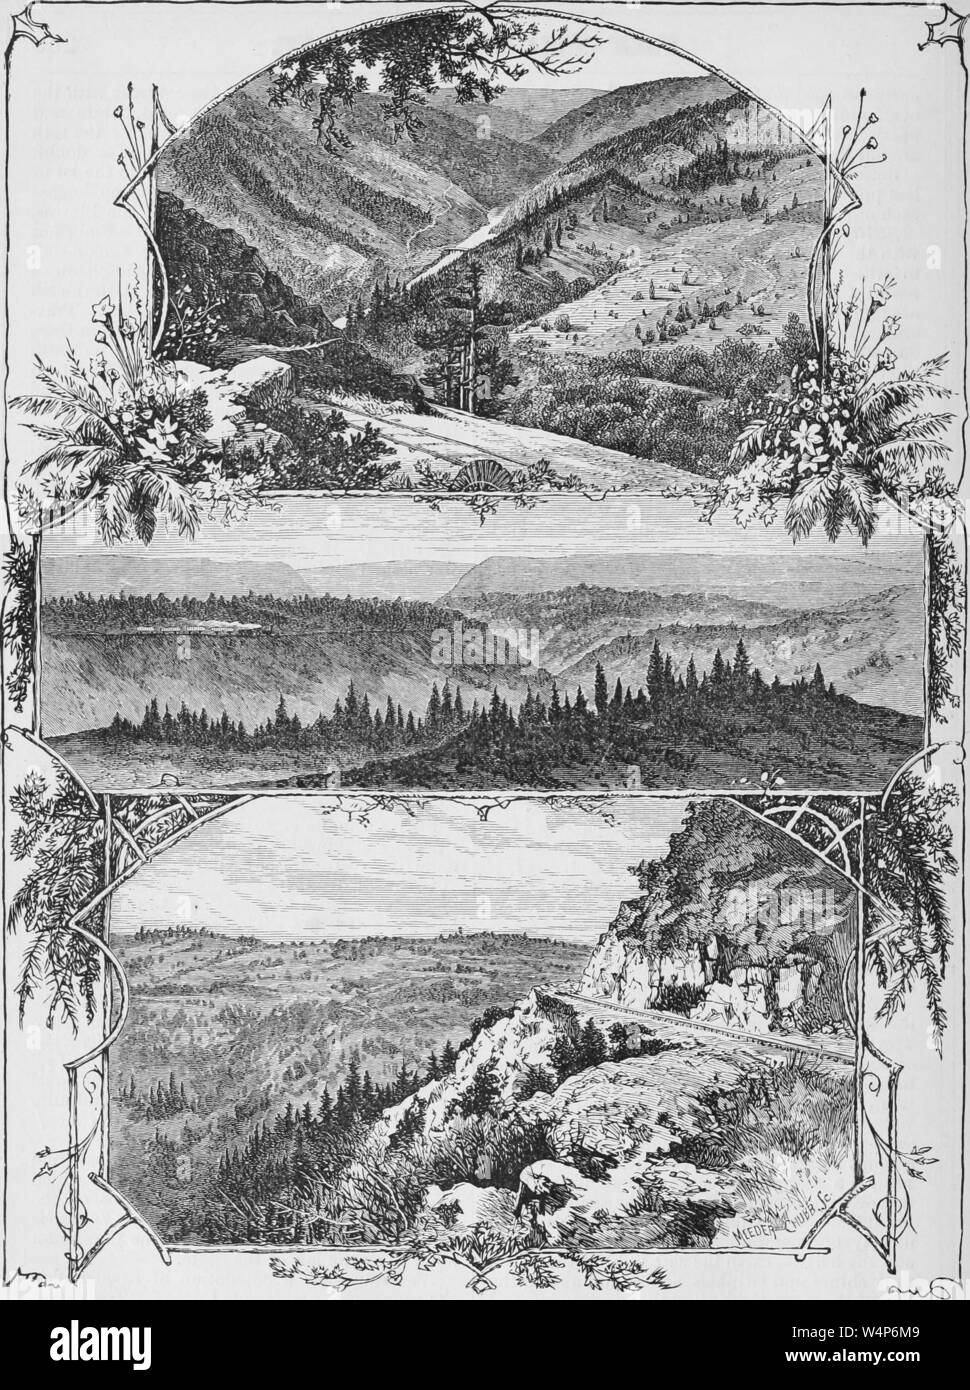 Engravings of the Cape Horn, American River, American River Canyon, and Point of Cape Horn, from the book 'The Pacific tourist' by Henry T. Williams, 1878. Courtesy Internet Archive. () Stock Photo